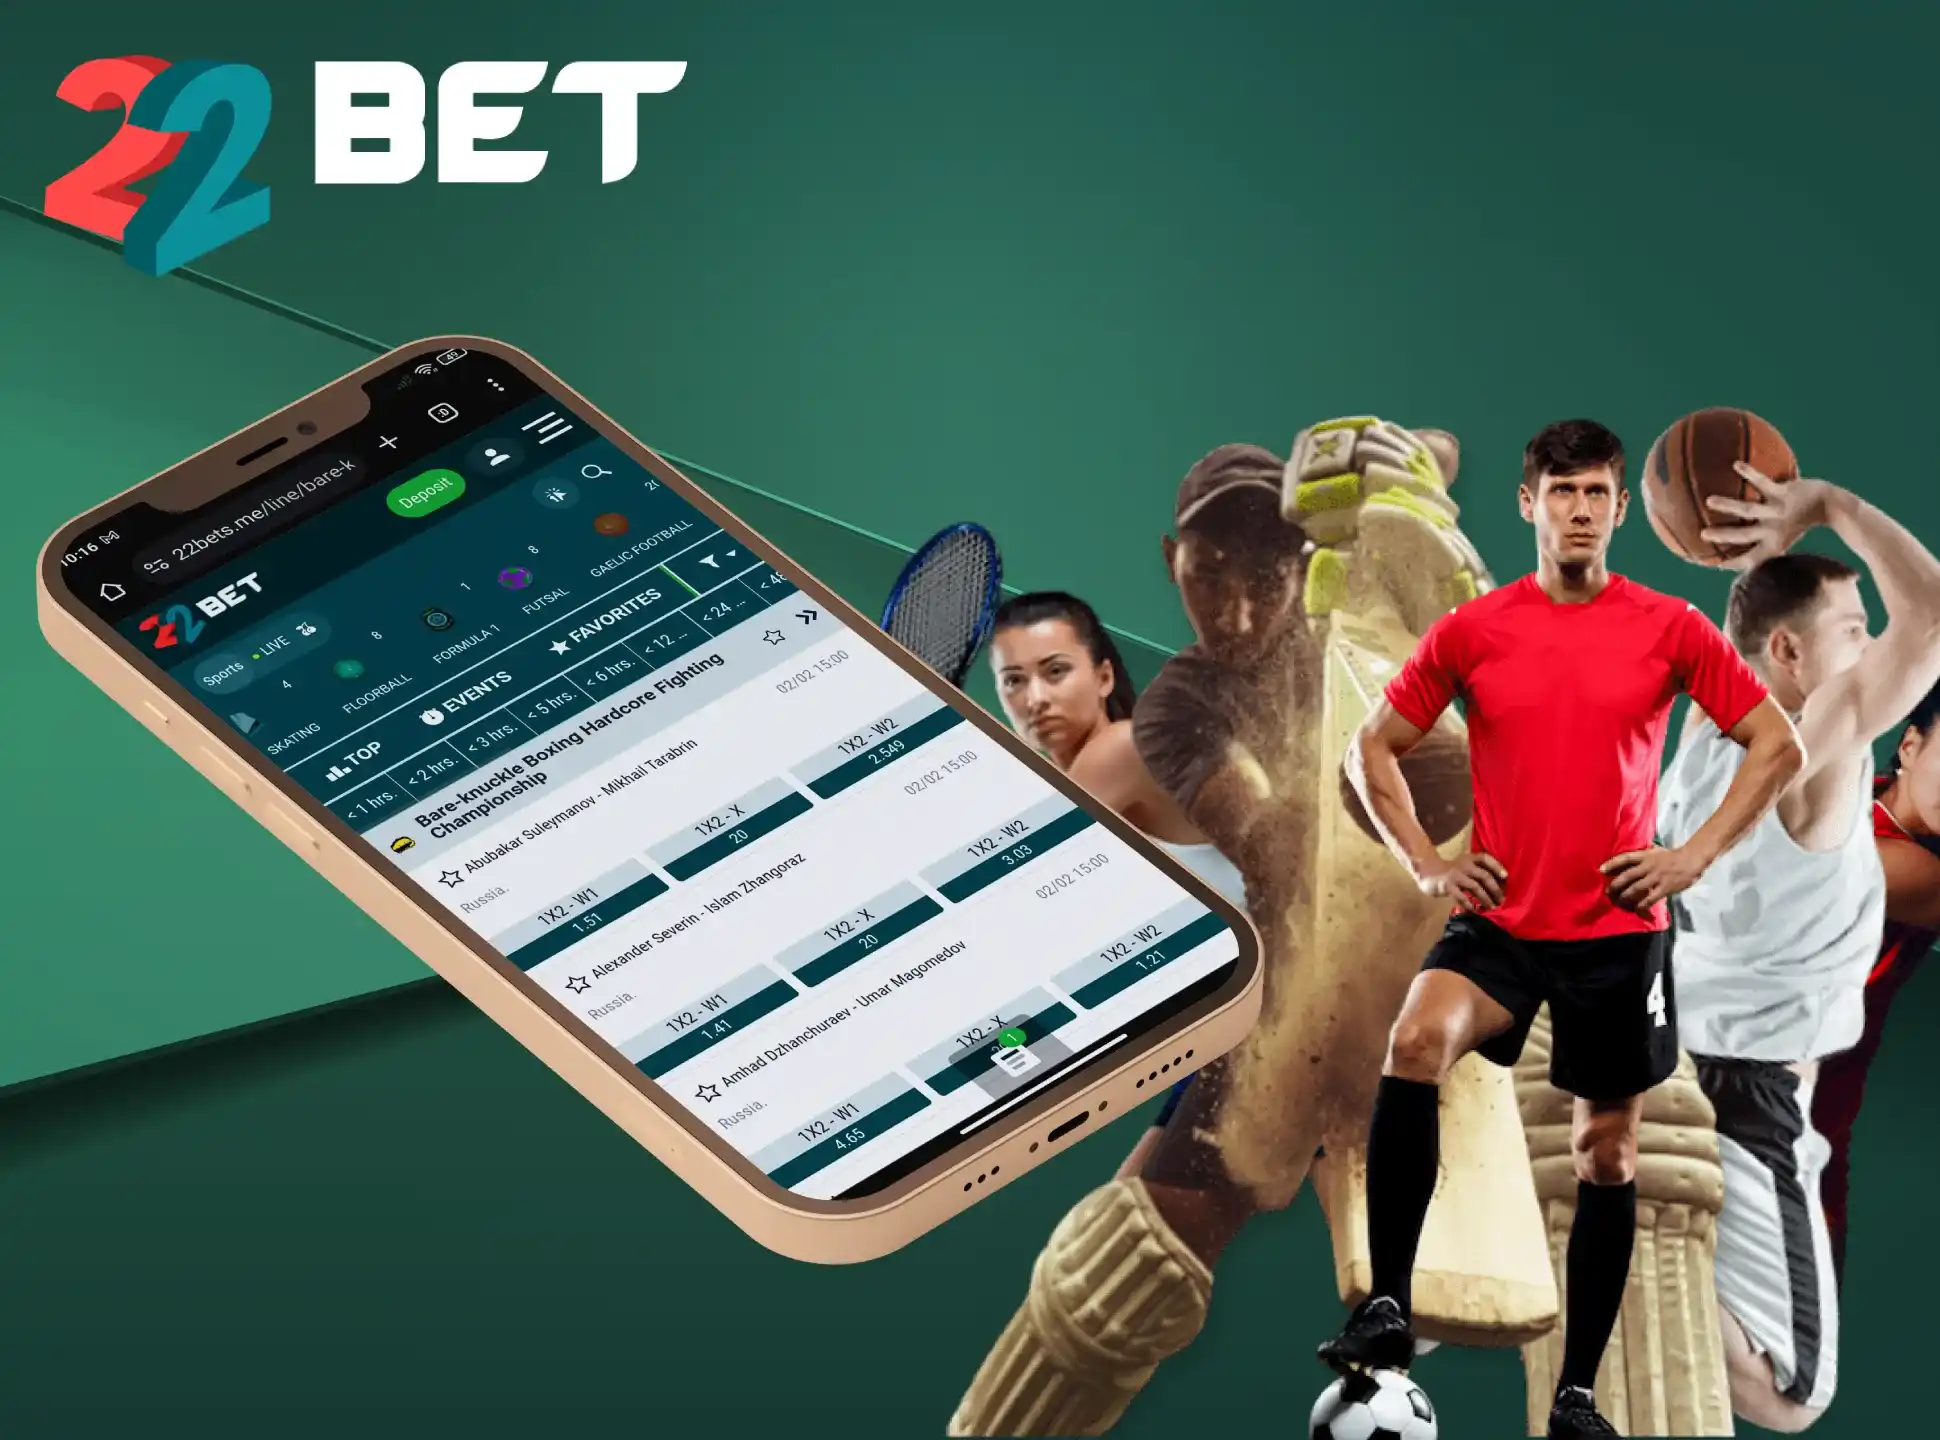 We advise you to explore the list of possible betting markets in the 22Bet app.